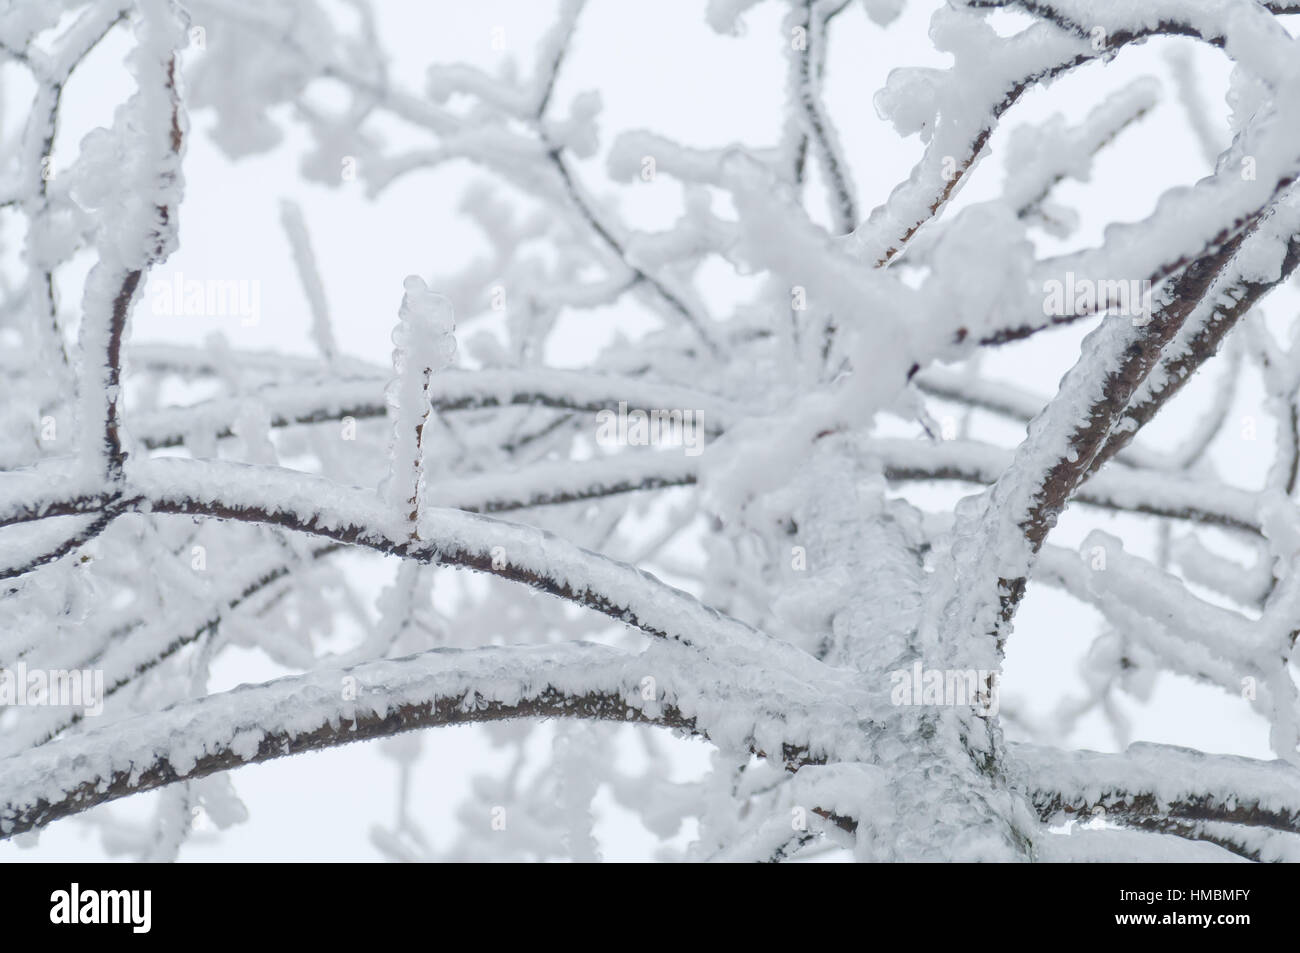 Freezing rain or sleet covered the trees and branches Stock Photo